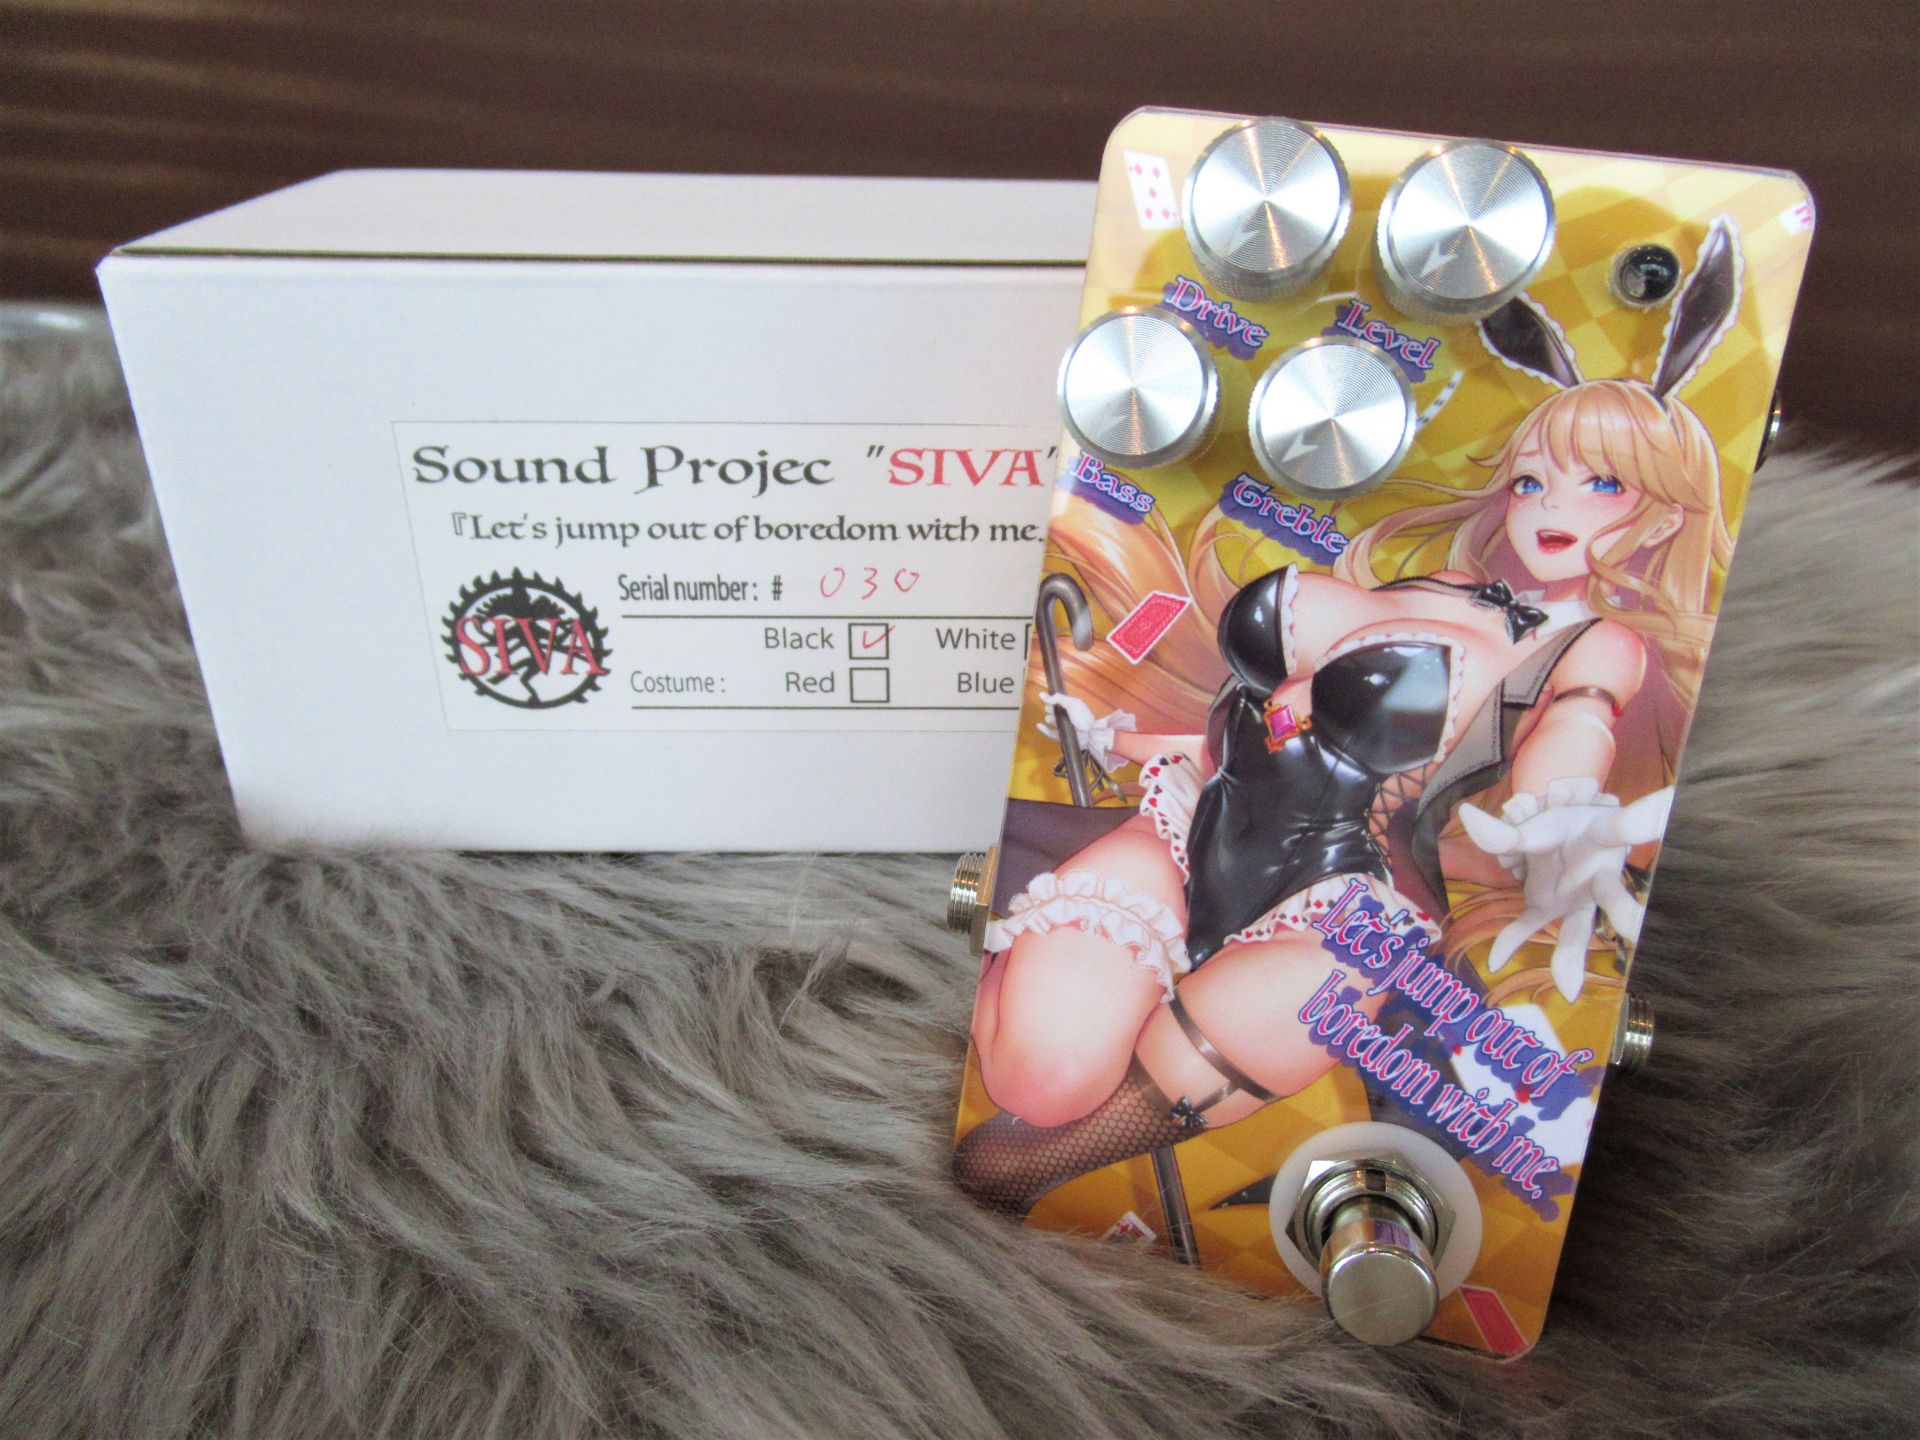 *Sound Project "SIVA" Let's jump out of boredom with me.最速入荷!! **北九州で非常に個性的なエフェクターを制作しているブランドSound Project "SIVA" 話題の新製品[!!-Crispy Overdrive-"Let's ju […]